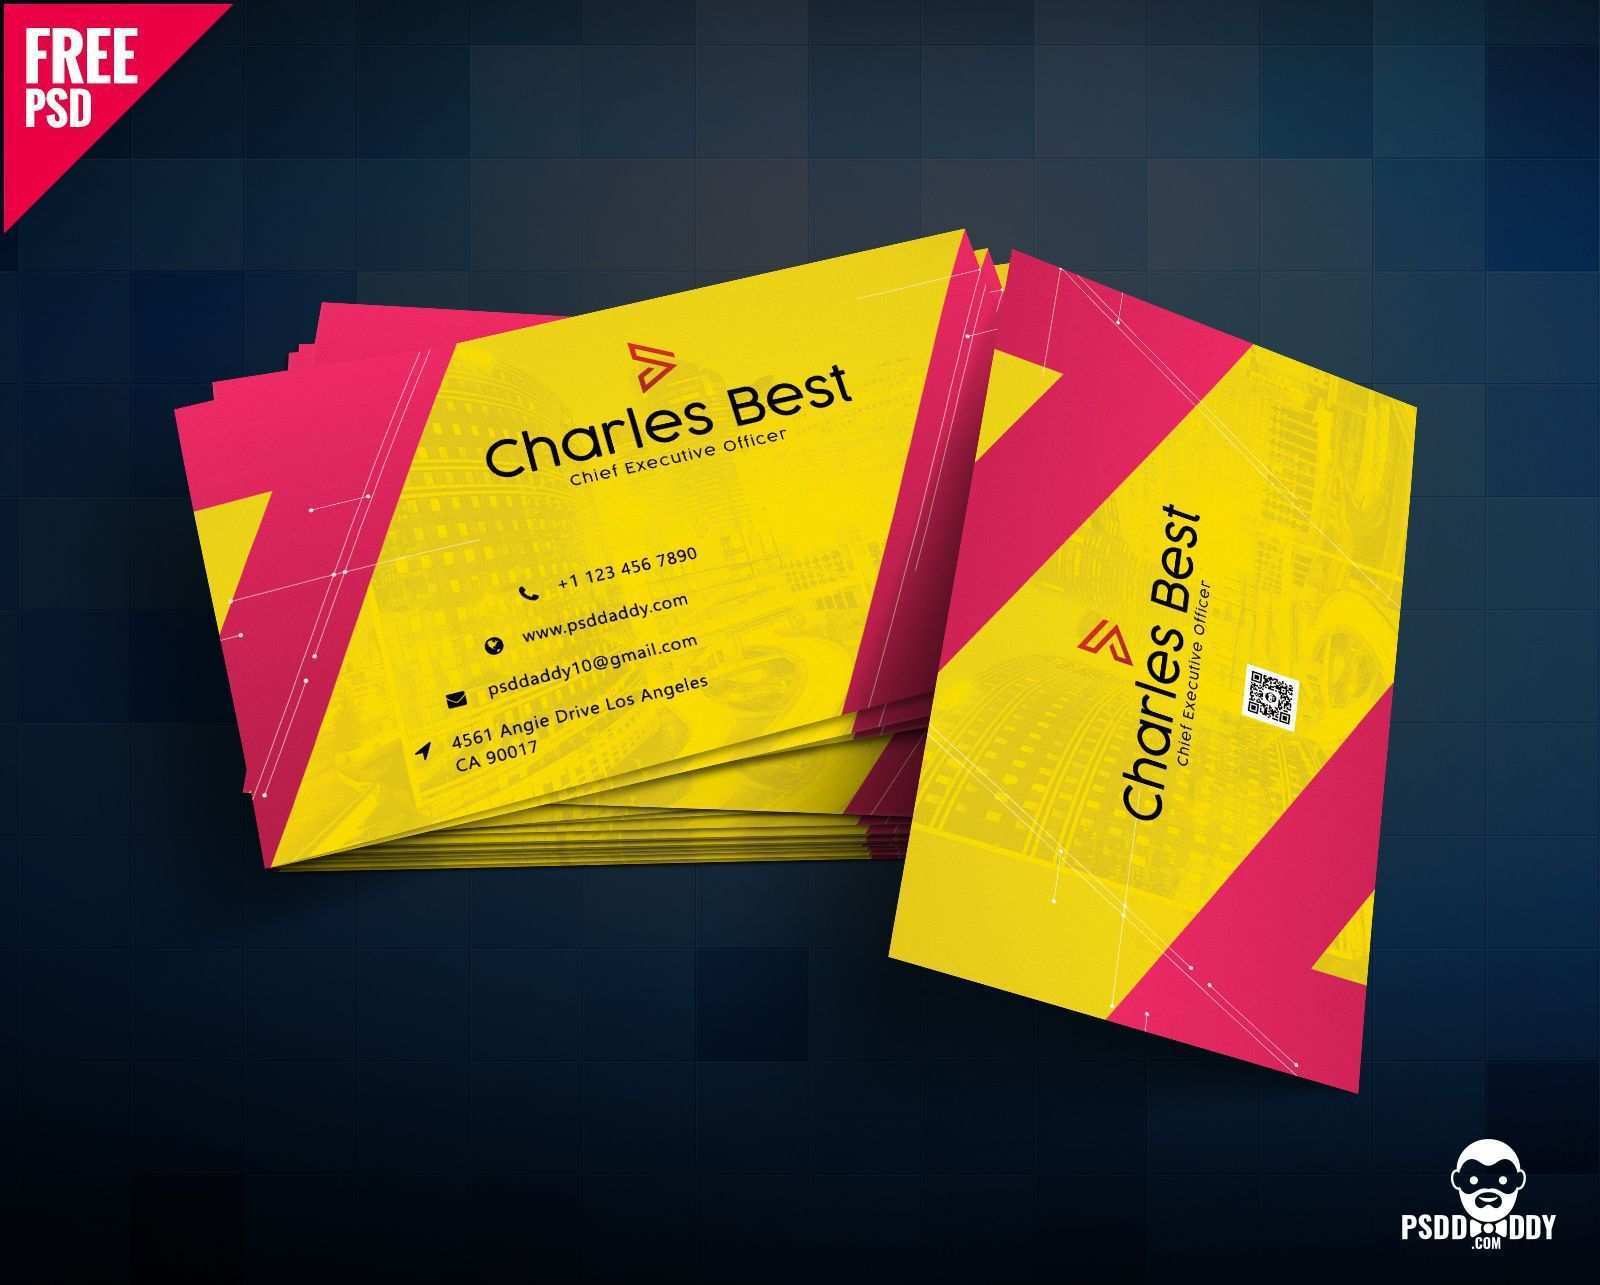 64 Creating Business Card Templates Free Download For Photoshop Now for Business Card Templates Free Download For Photoshop